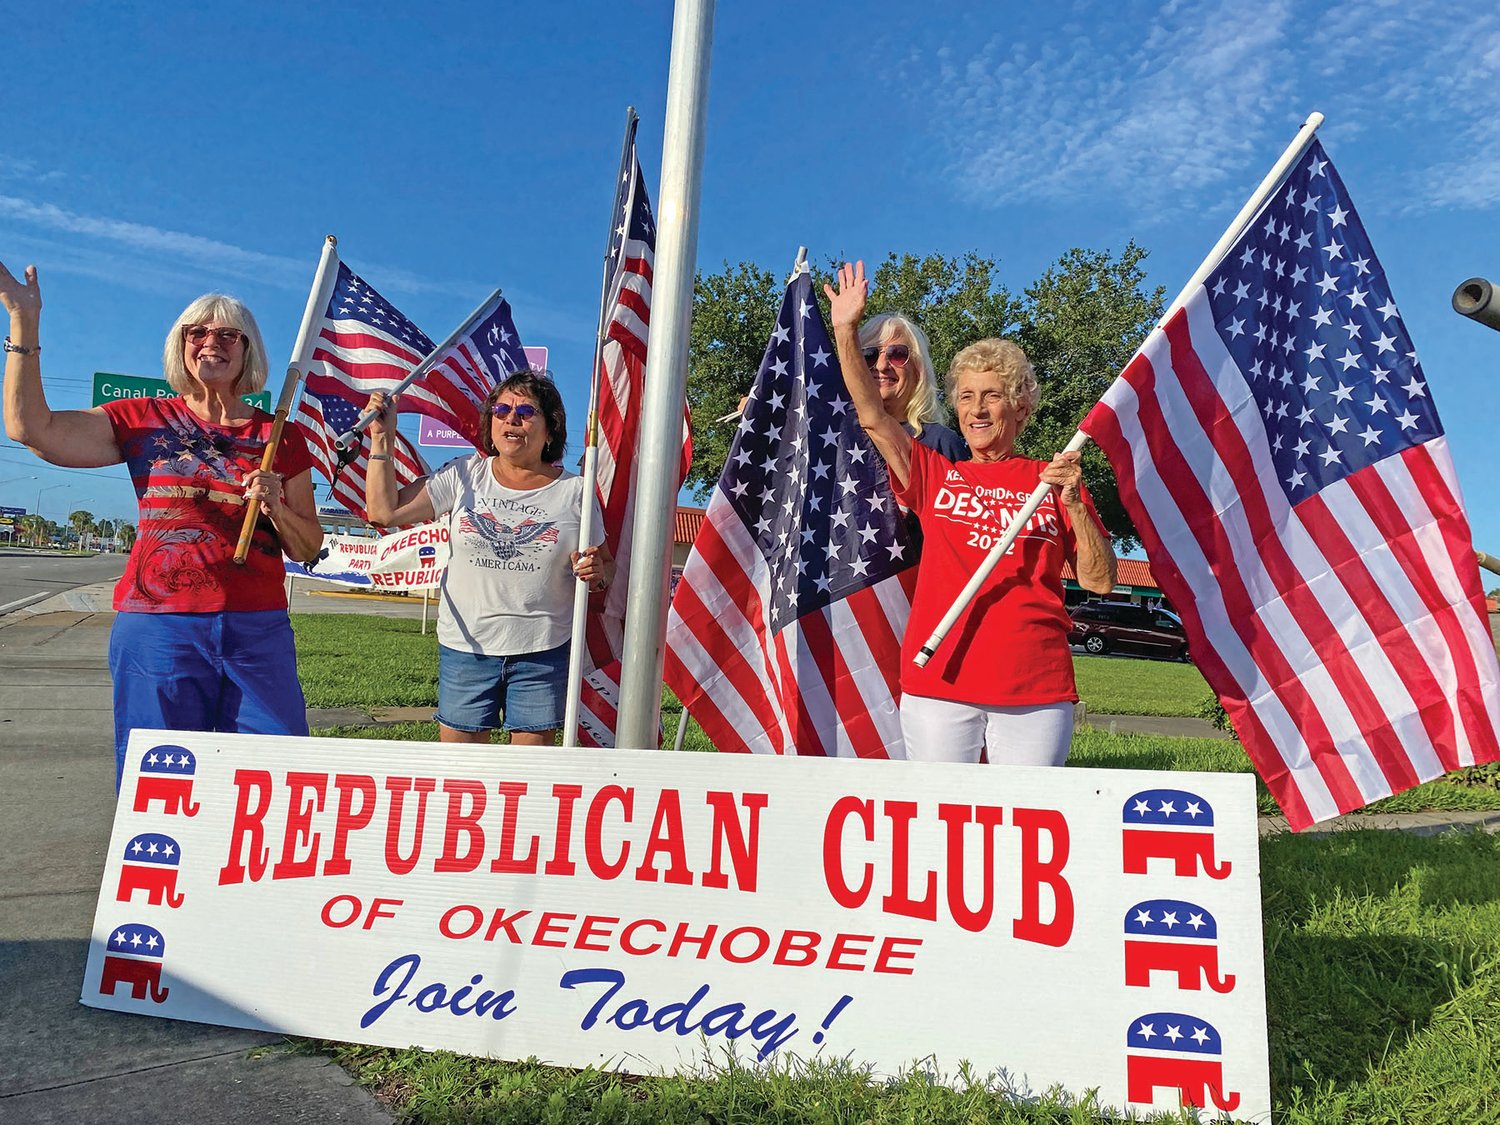 Left to right: Waving flags are Sallie Craig, Cynthia Holmes, Helen Brumit, and Club President Alicia LaChance.